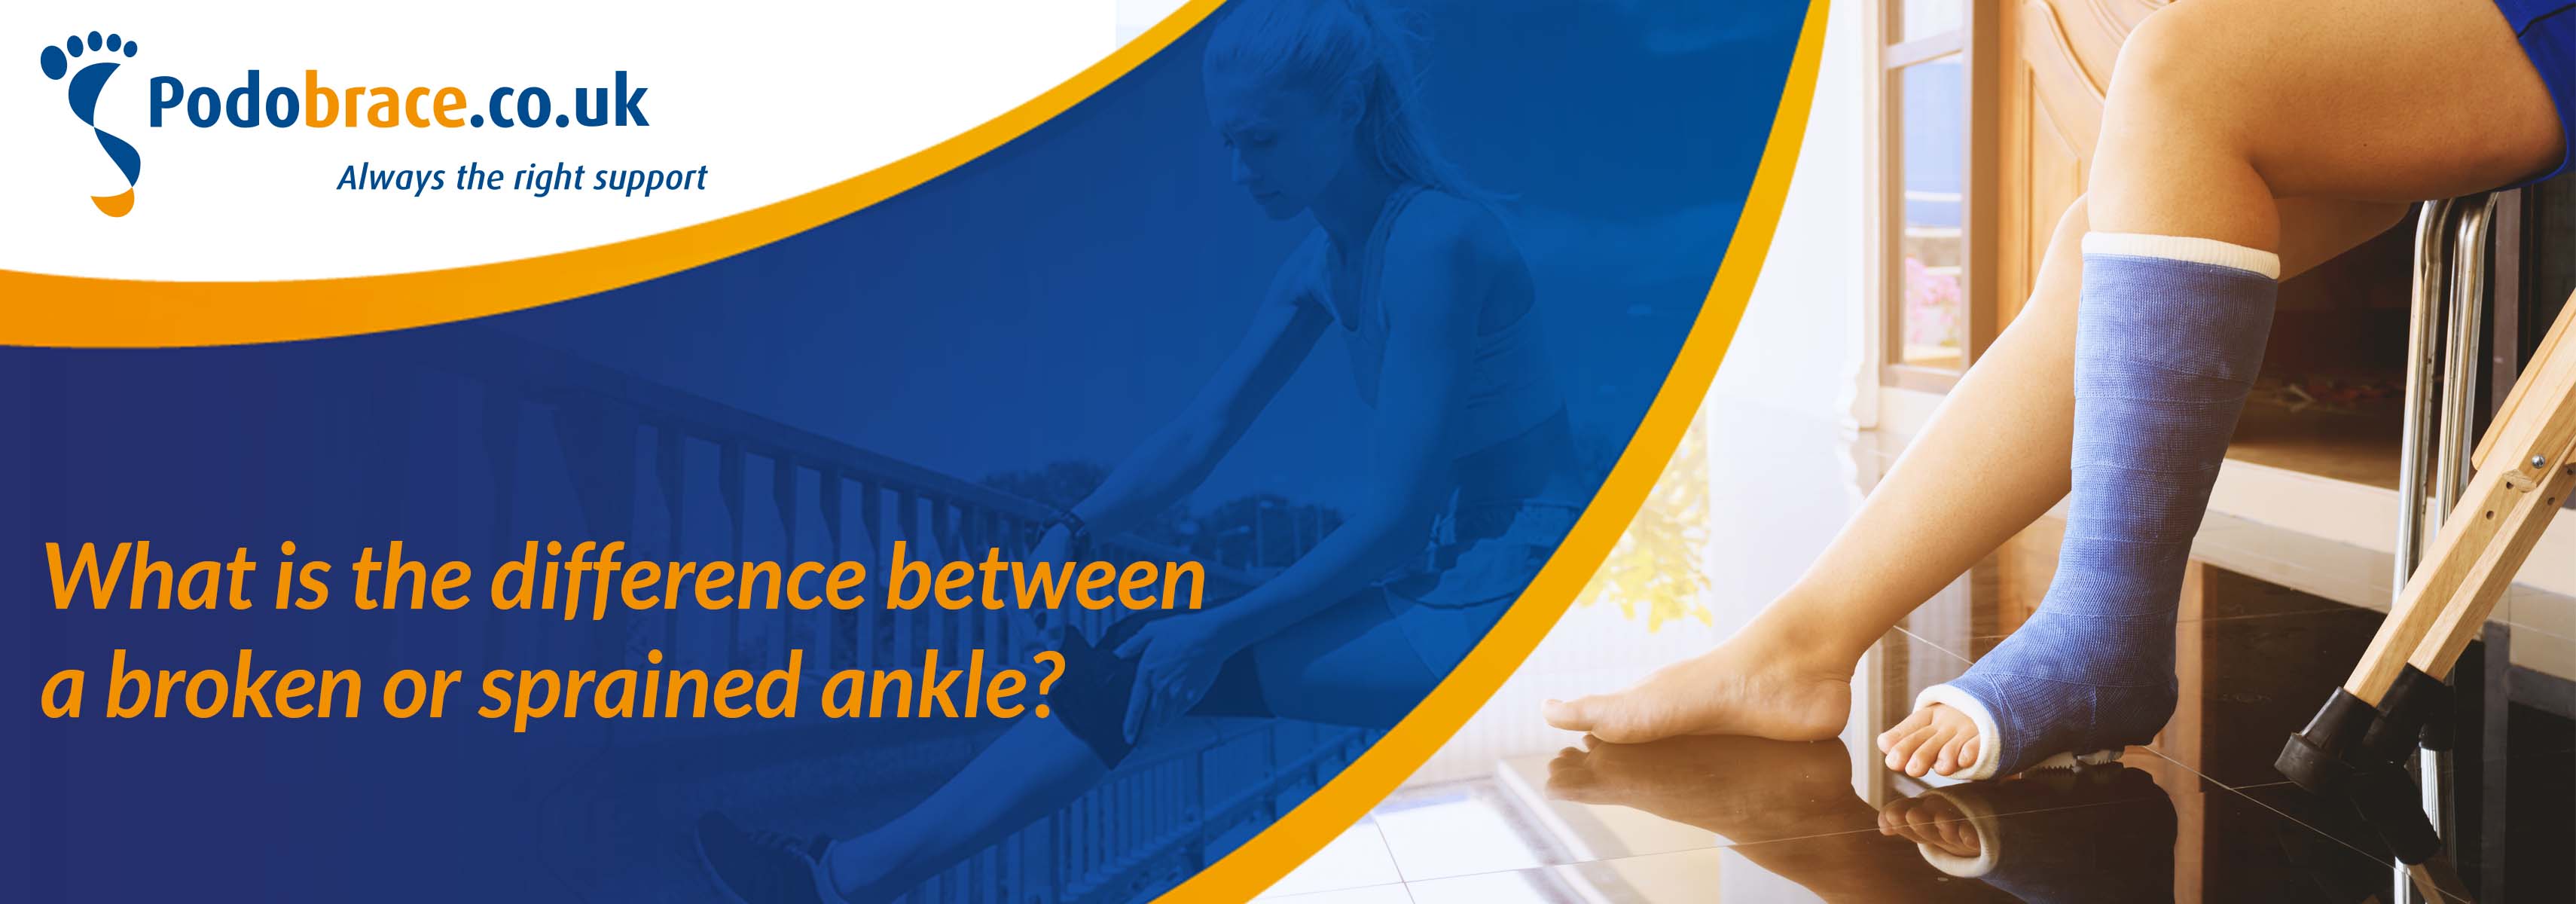 what is the difference between a broken or sprained ankle